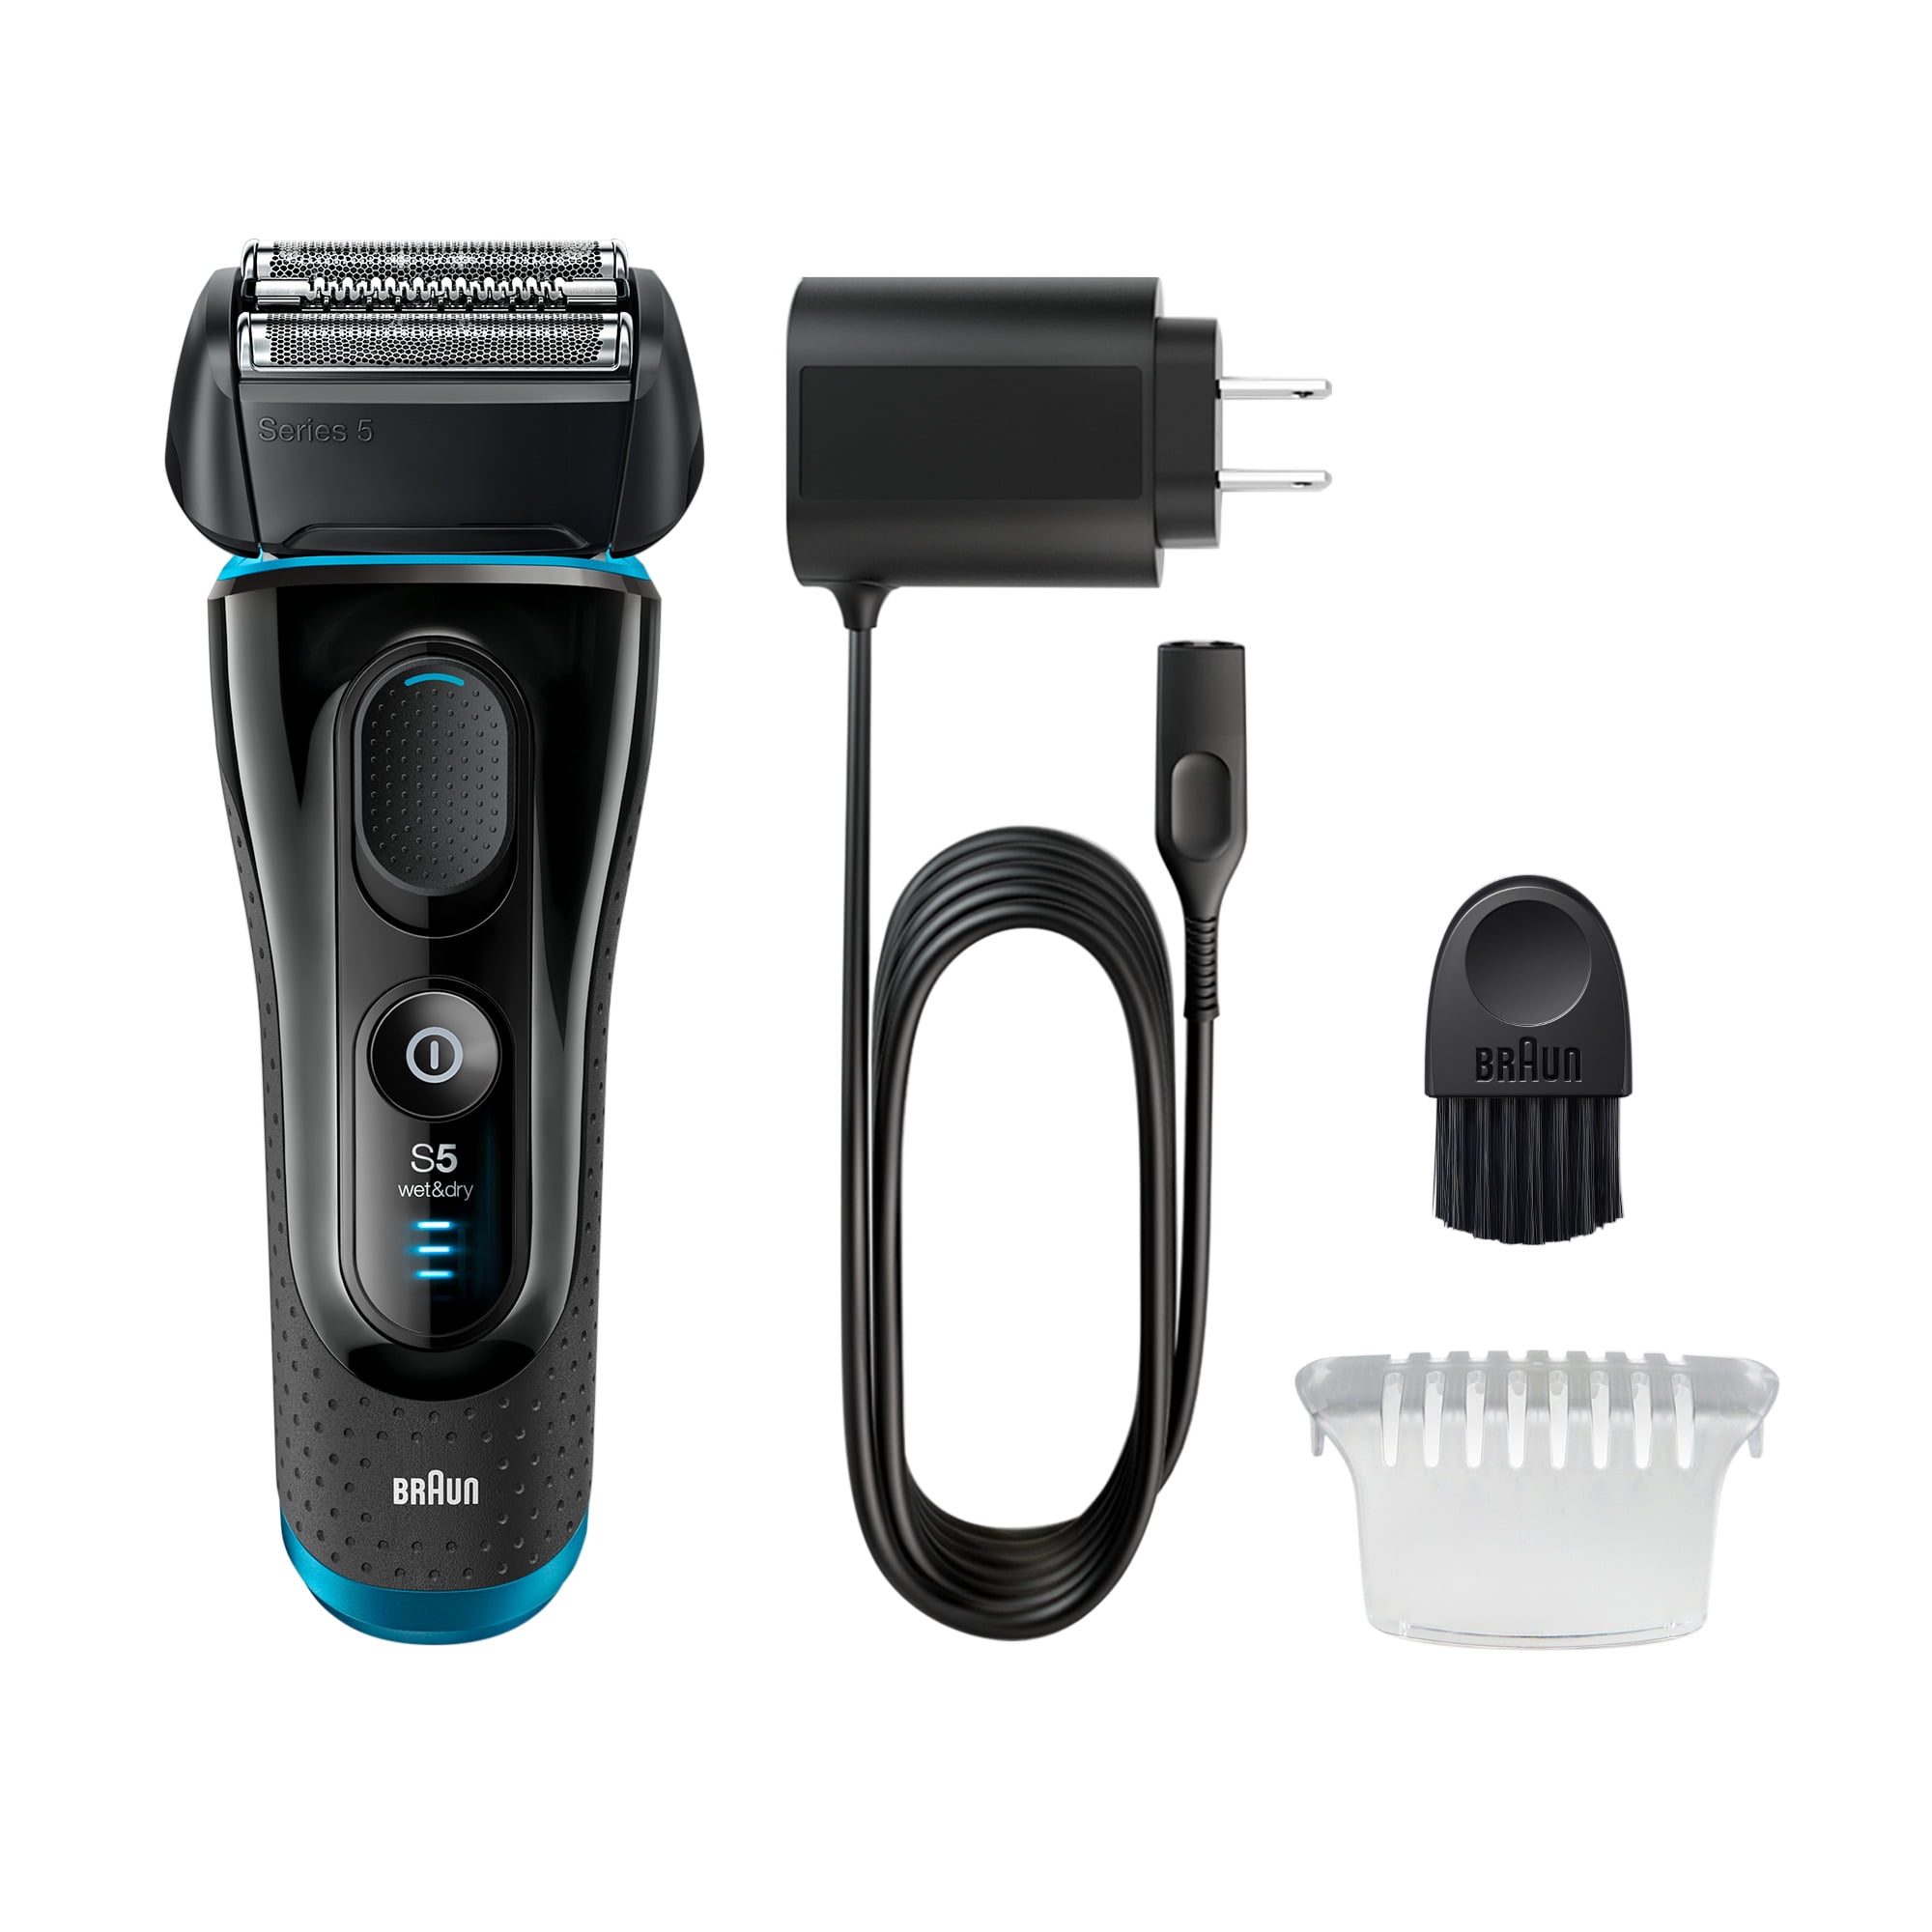 Braun Series 5 51-W1200s Wet & Dry shaver with soft pouch and 1 attachment  51-M1200S Mint